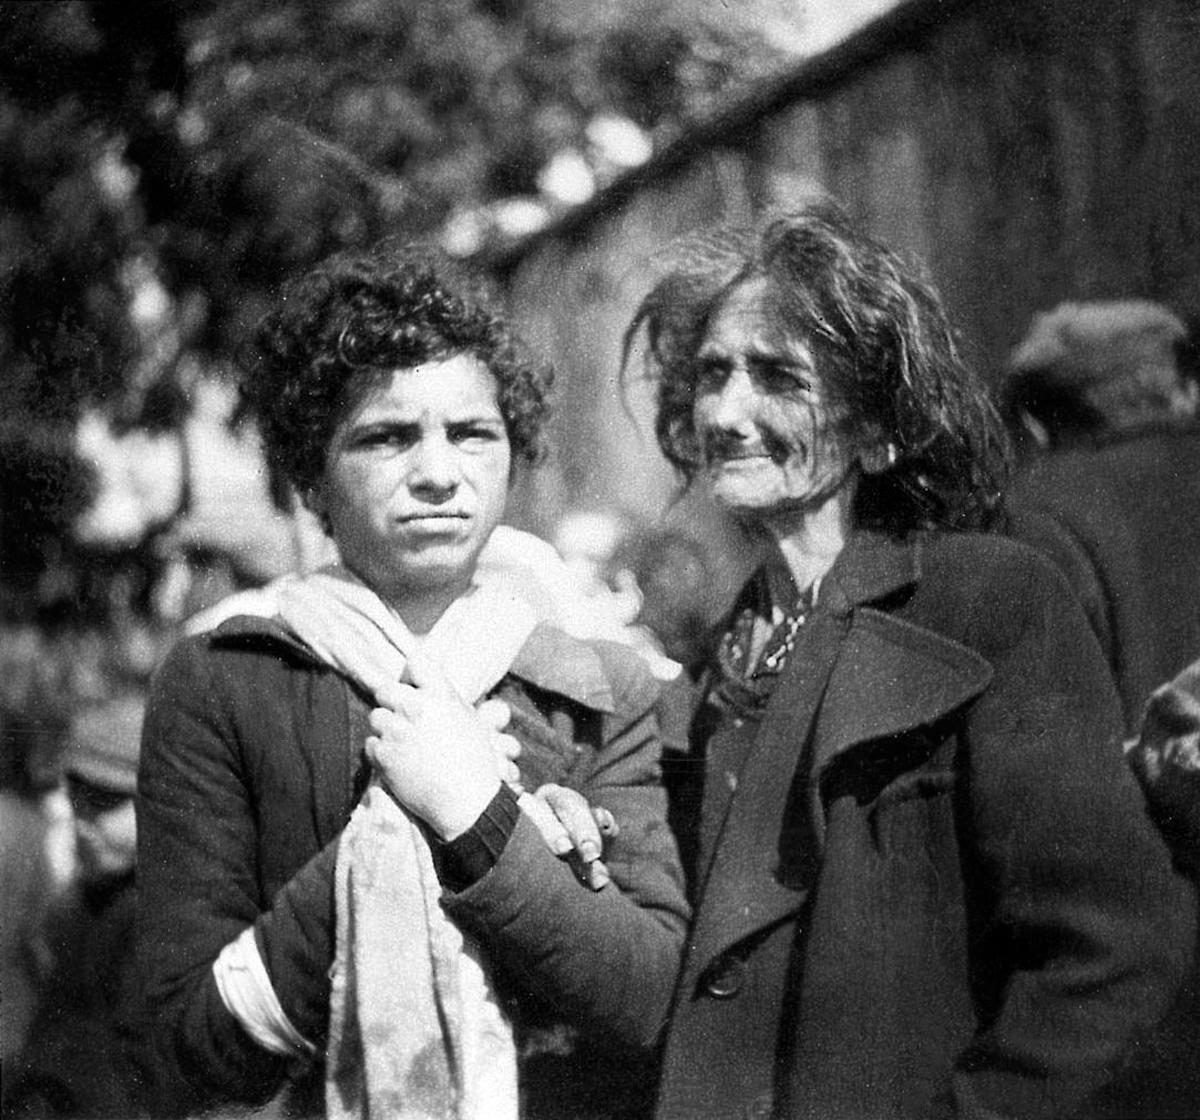 Two Jewish women during one of the deportations from Szydłowiec to the Treblinka extermination camp.